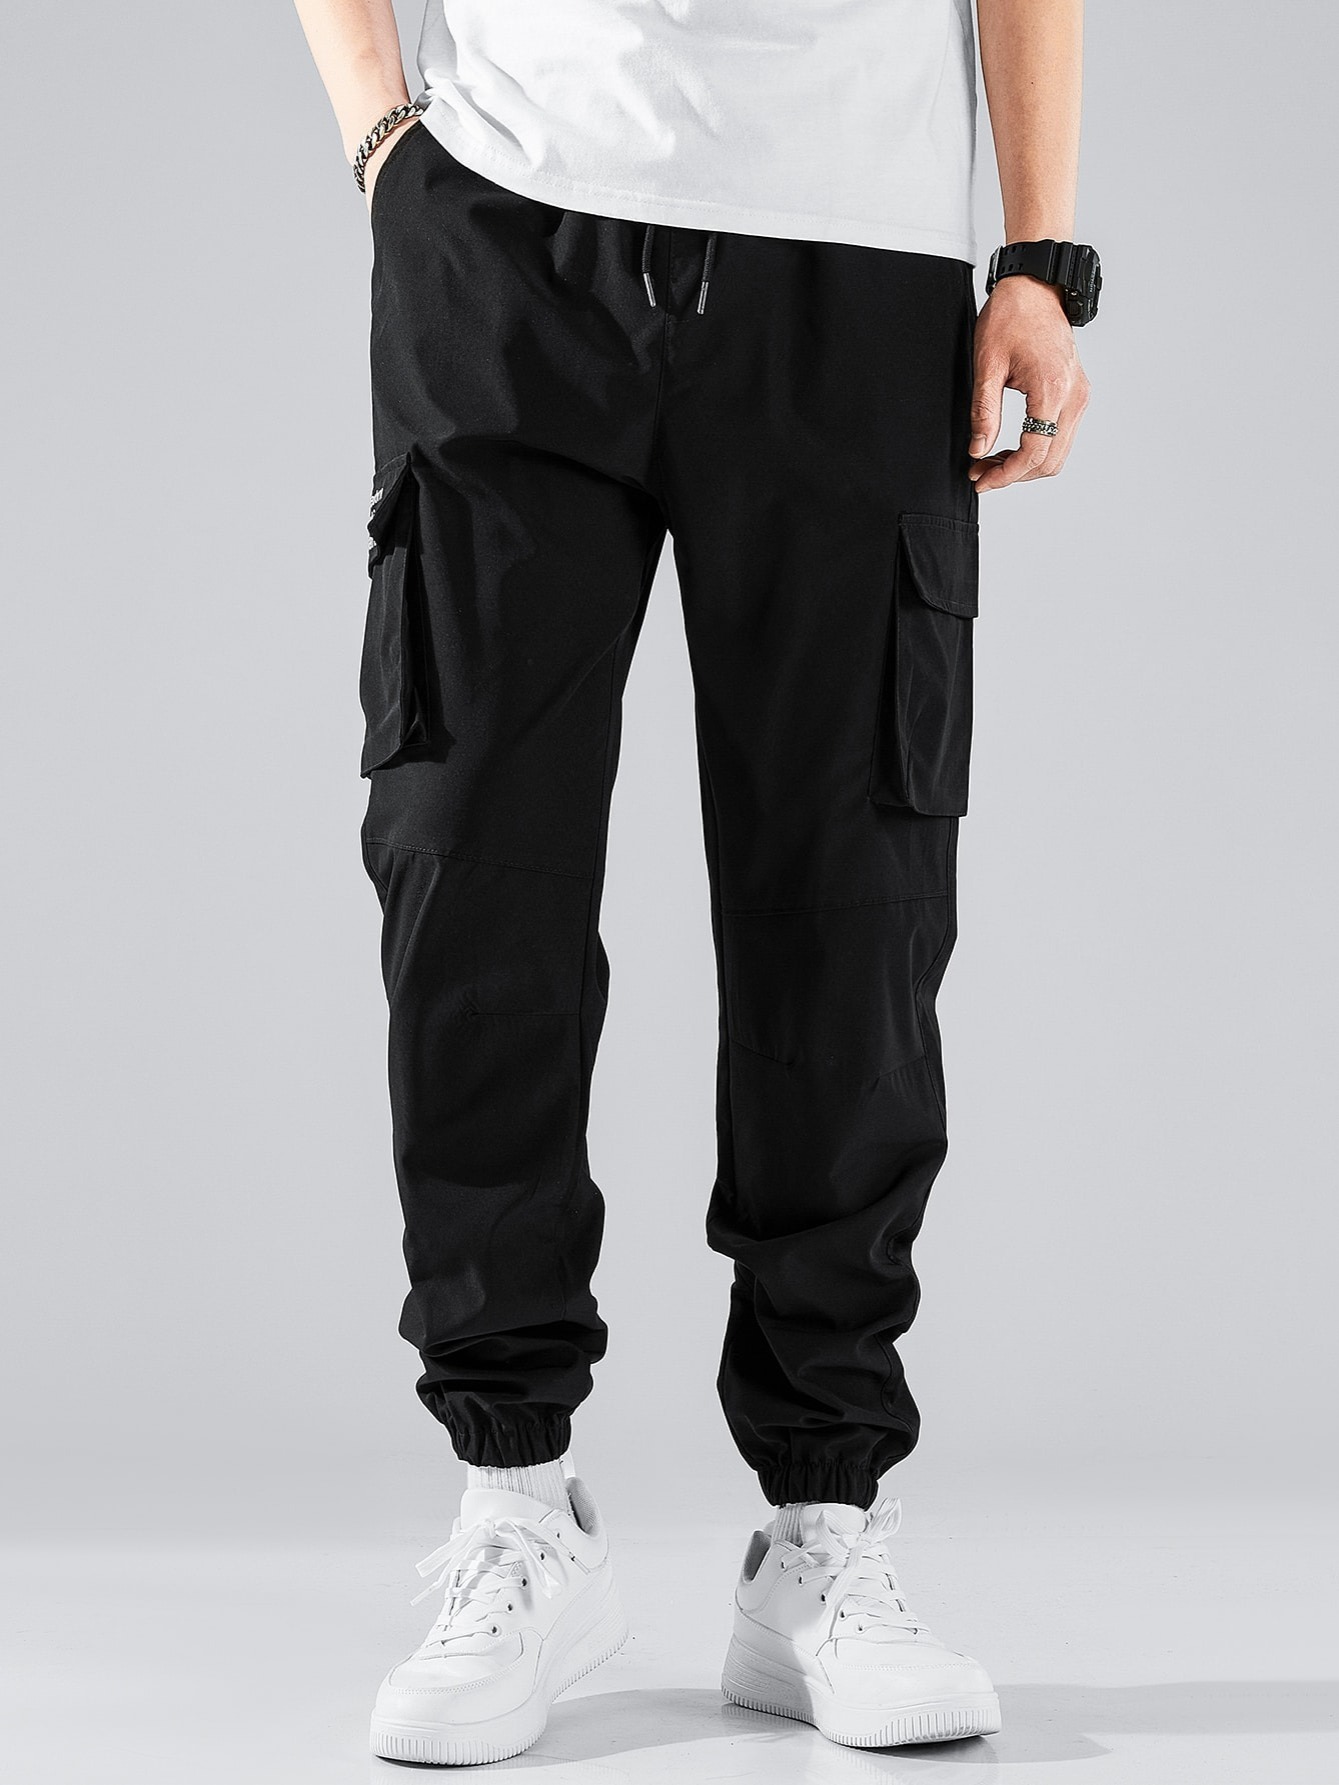 Mens Casual Jogger Cargo Pants With Flap Pockets | Discounts For ...